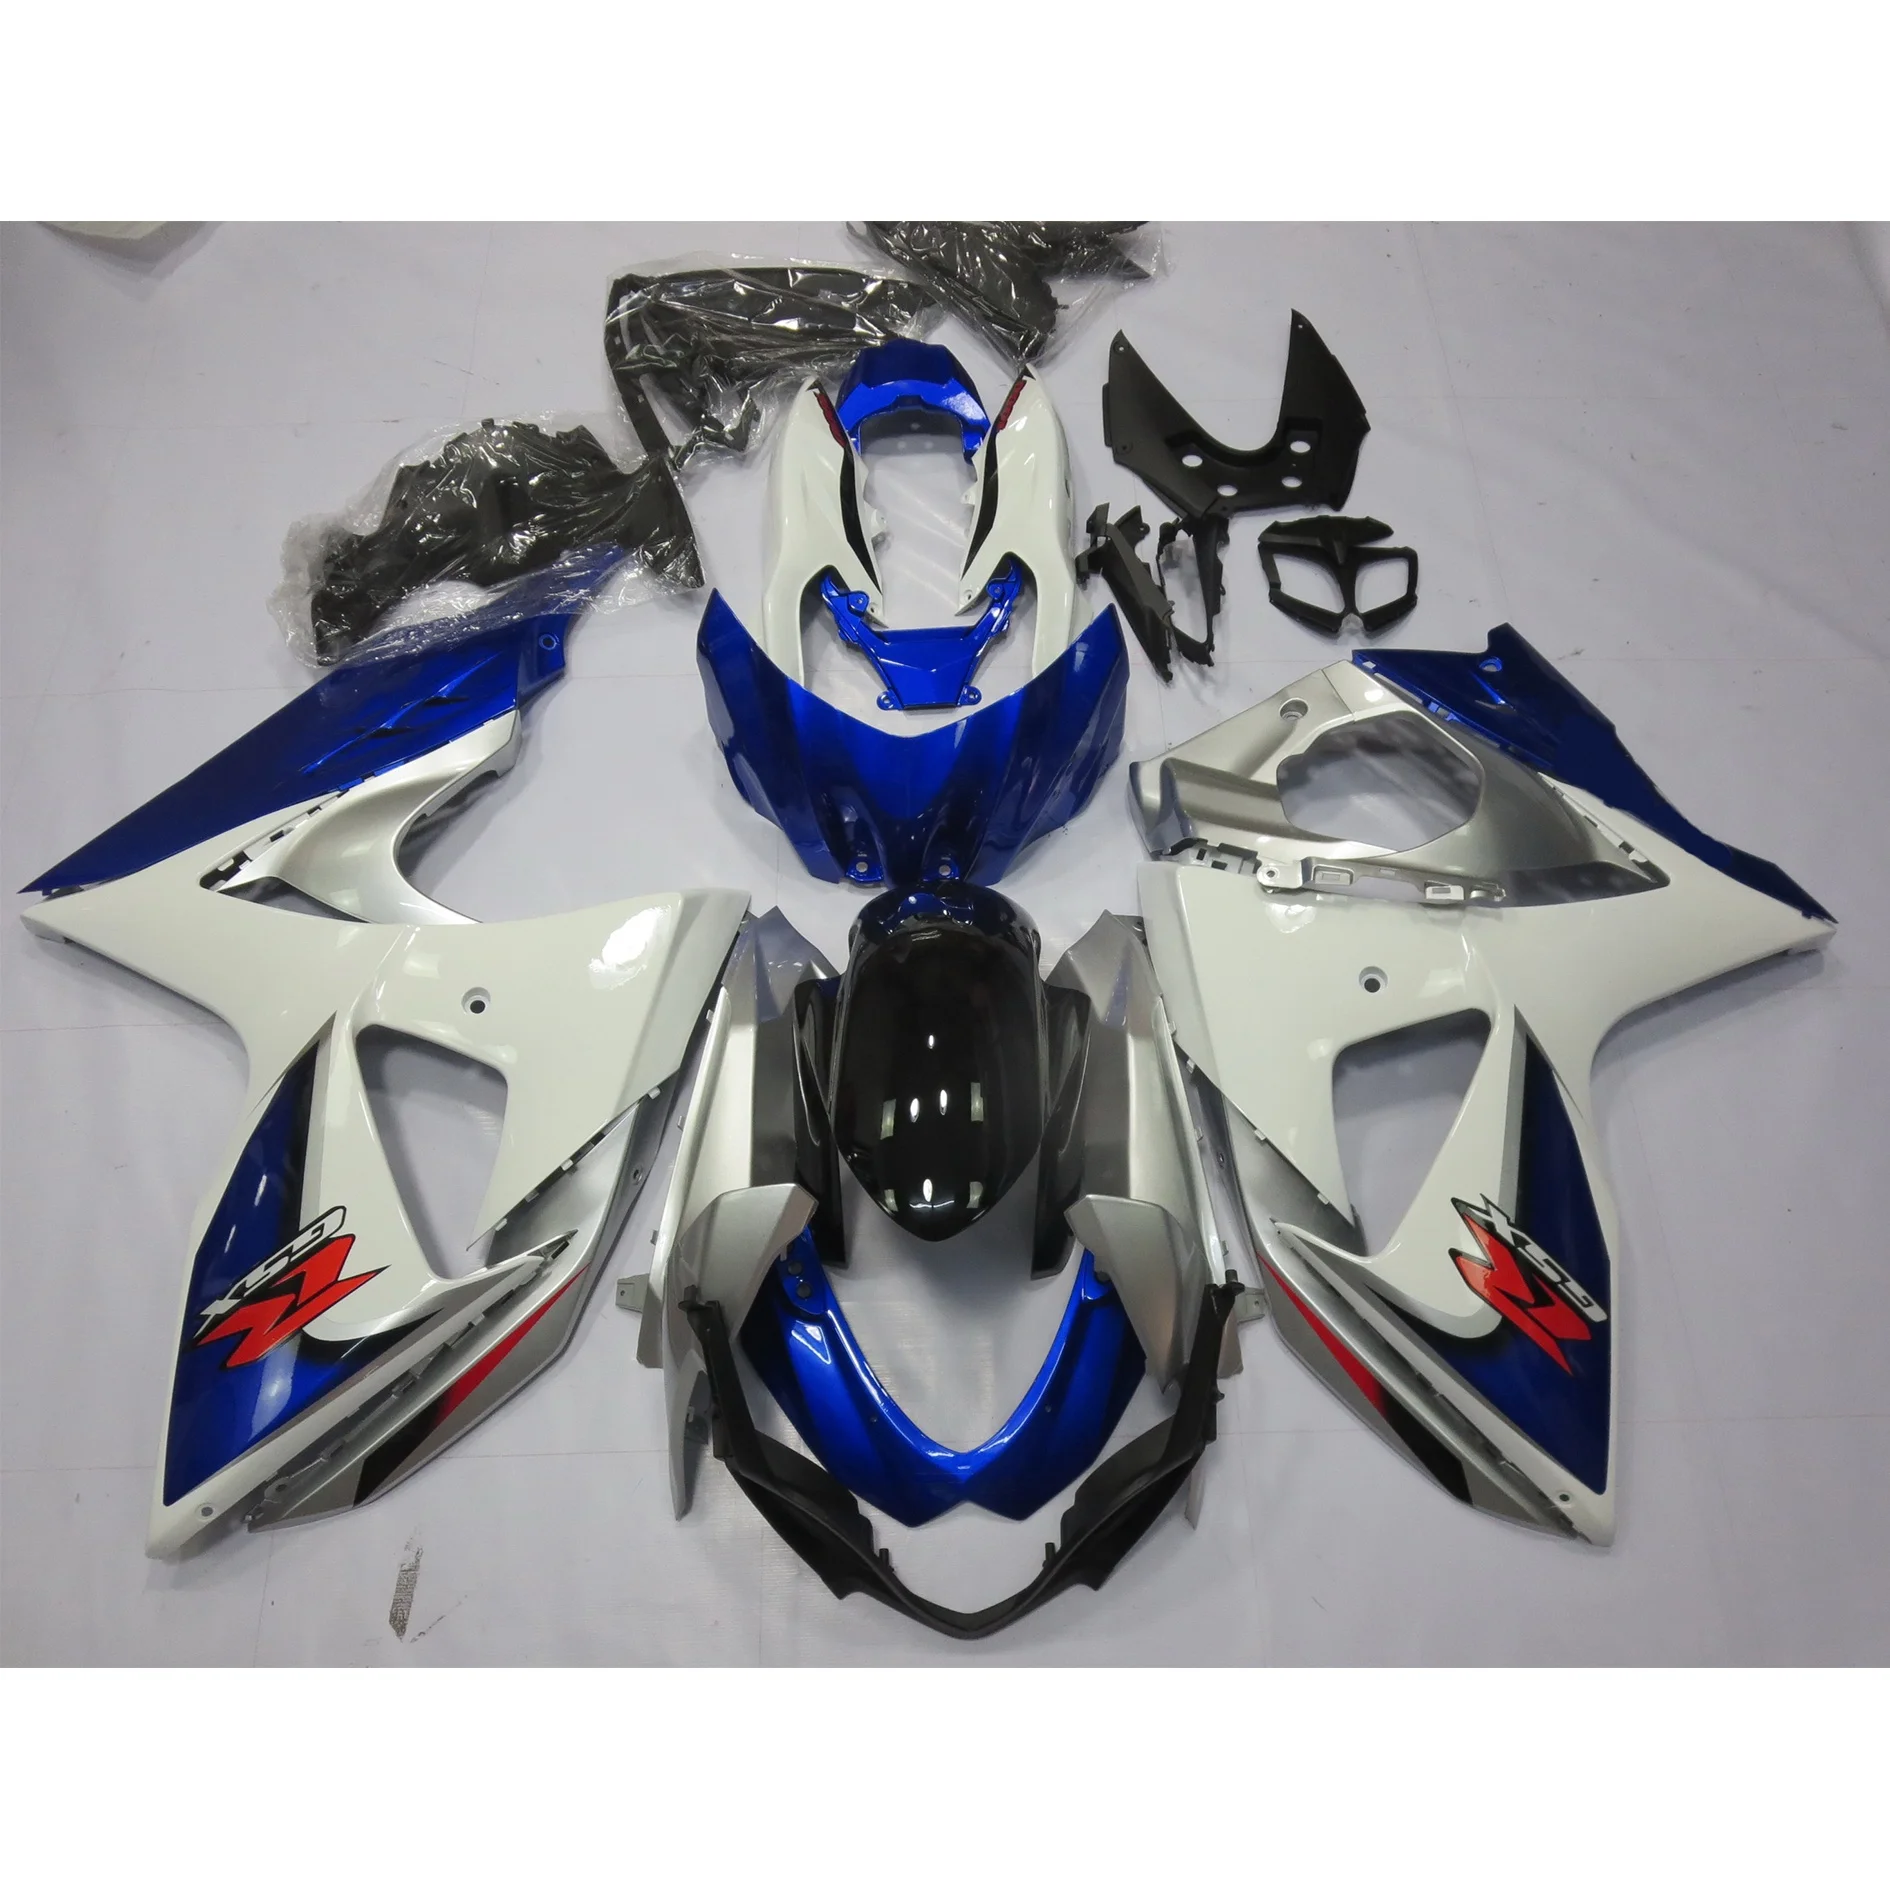 

2022 WHSC Silver Blue Black Motorcycle Accessories For SUZUKI GSXR1000 2009-2016 09 K9 Motorcycle Body Systems Fairing Kits, Pictures shown